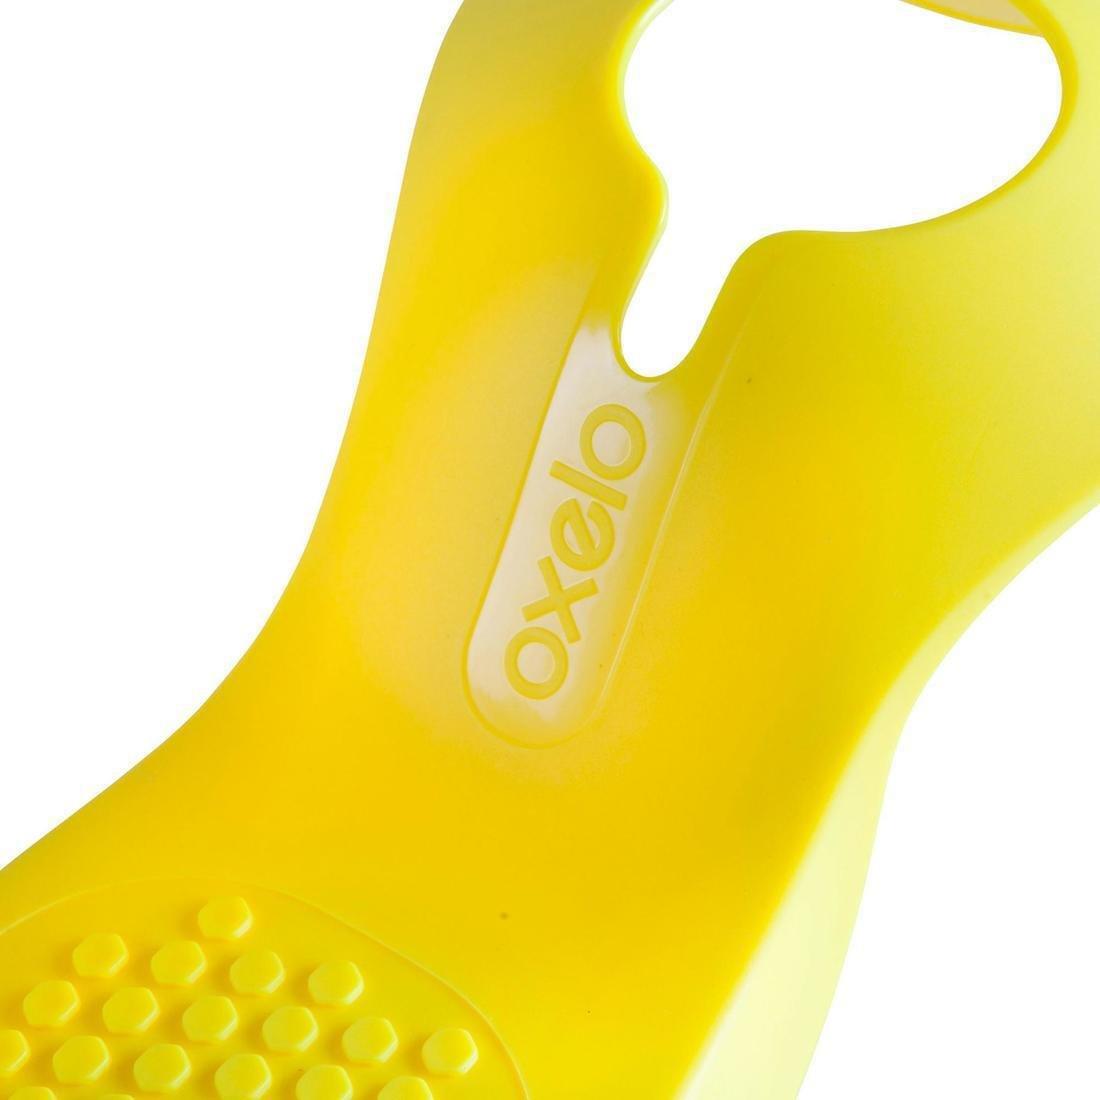 OXELO - B1 Scooter Shell, Blue